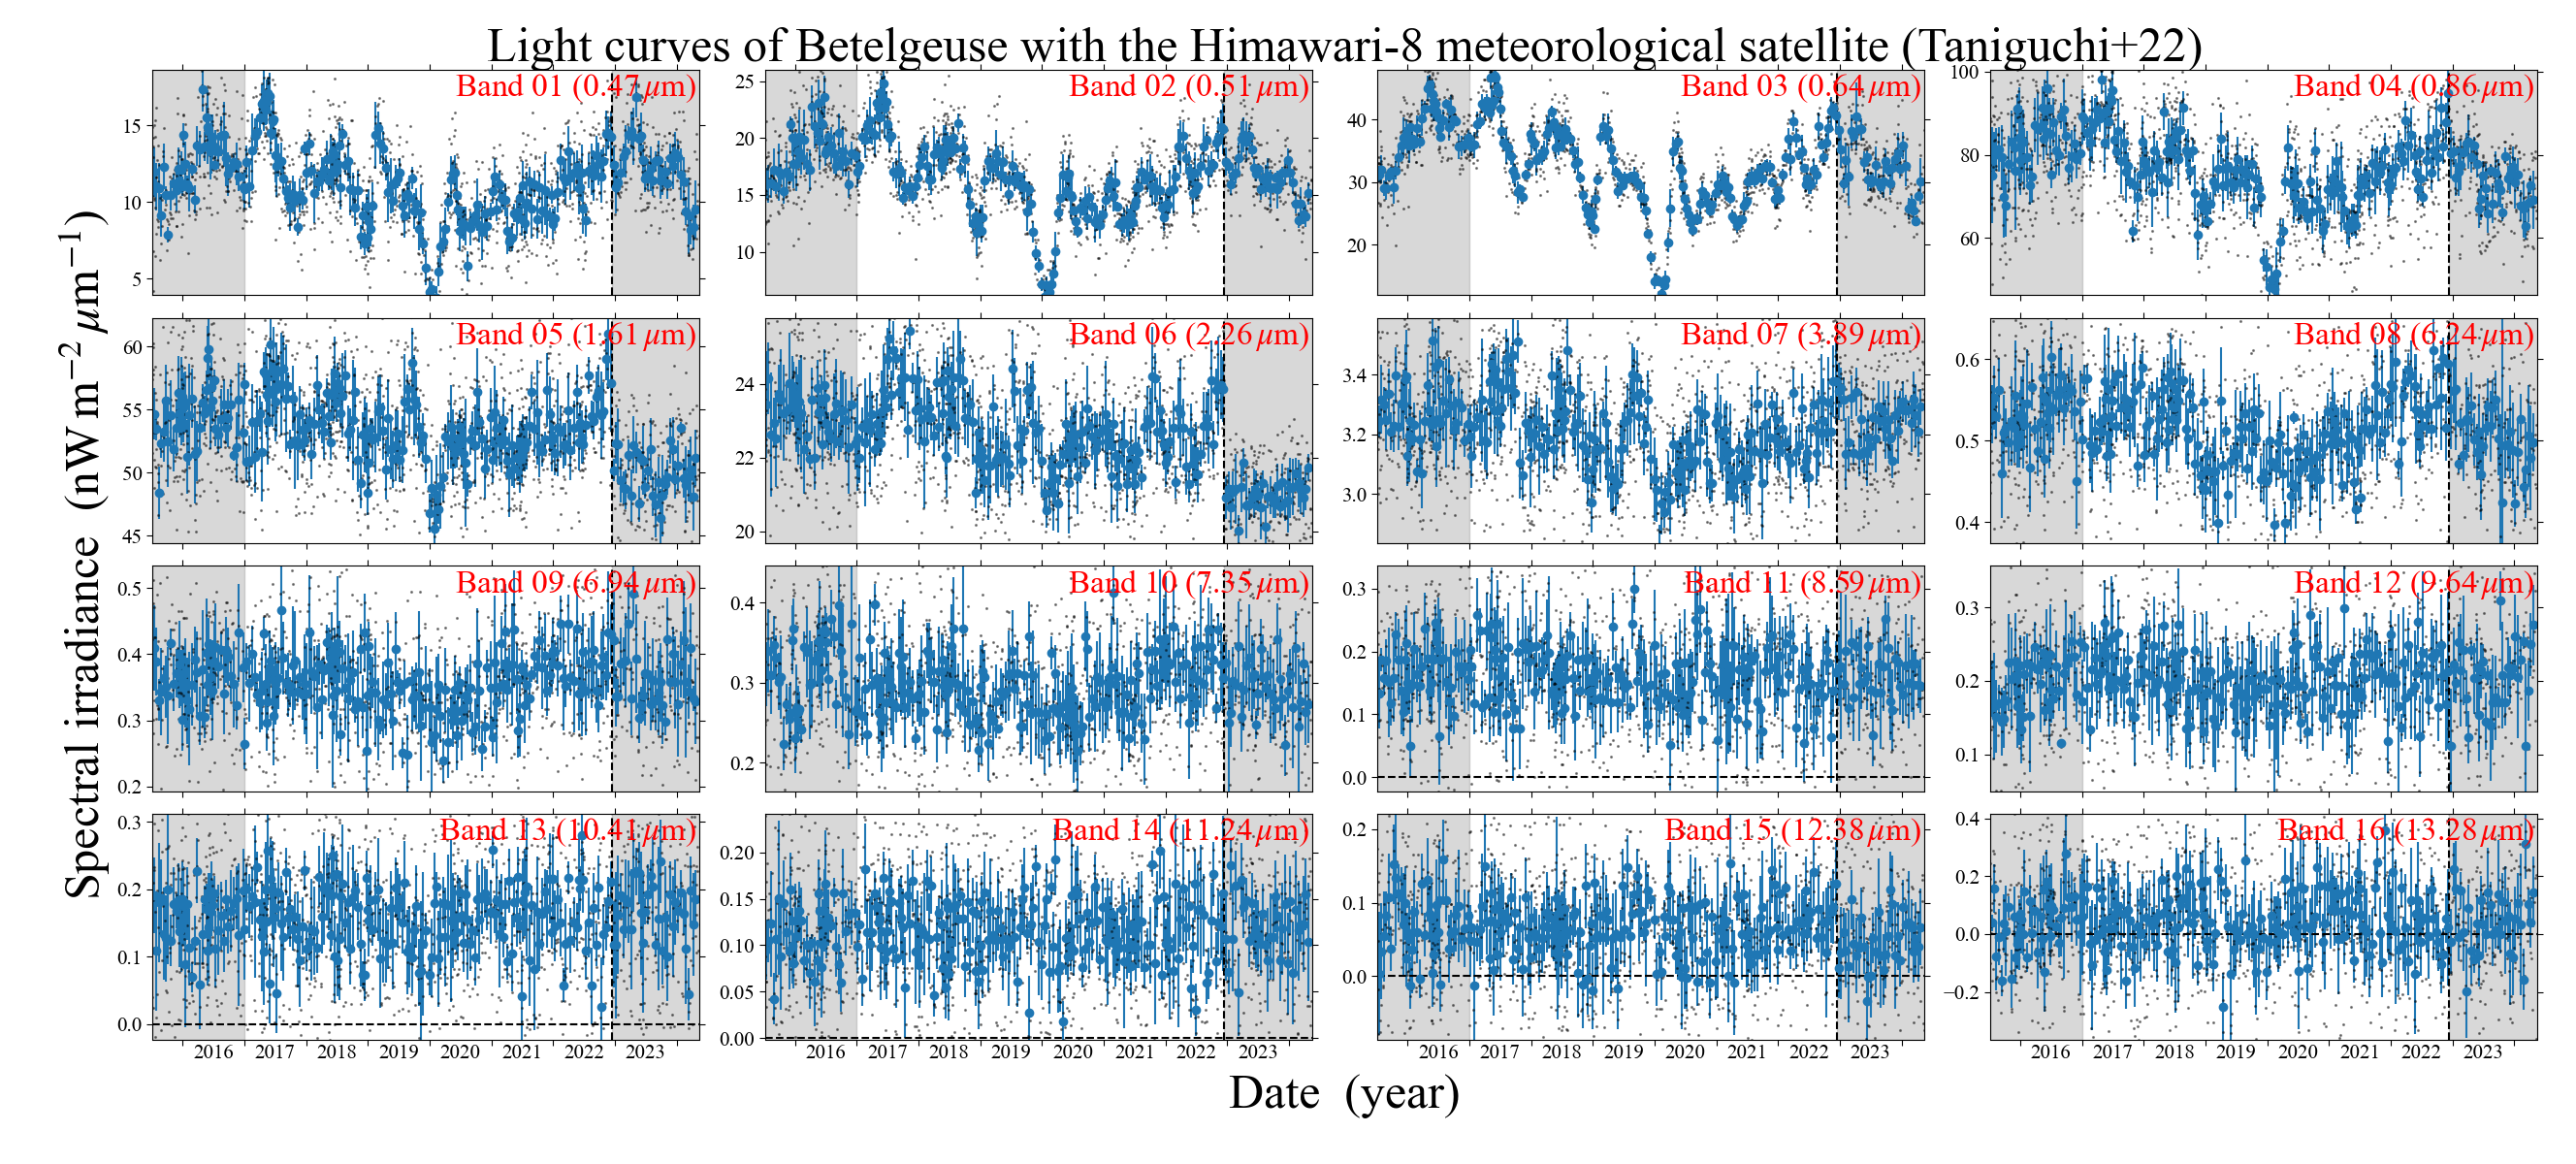 Light curves of Betelgeuse